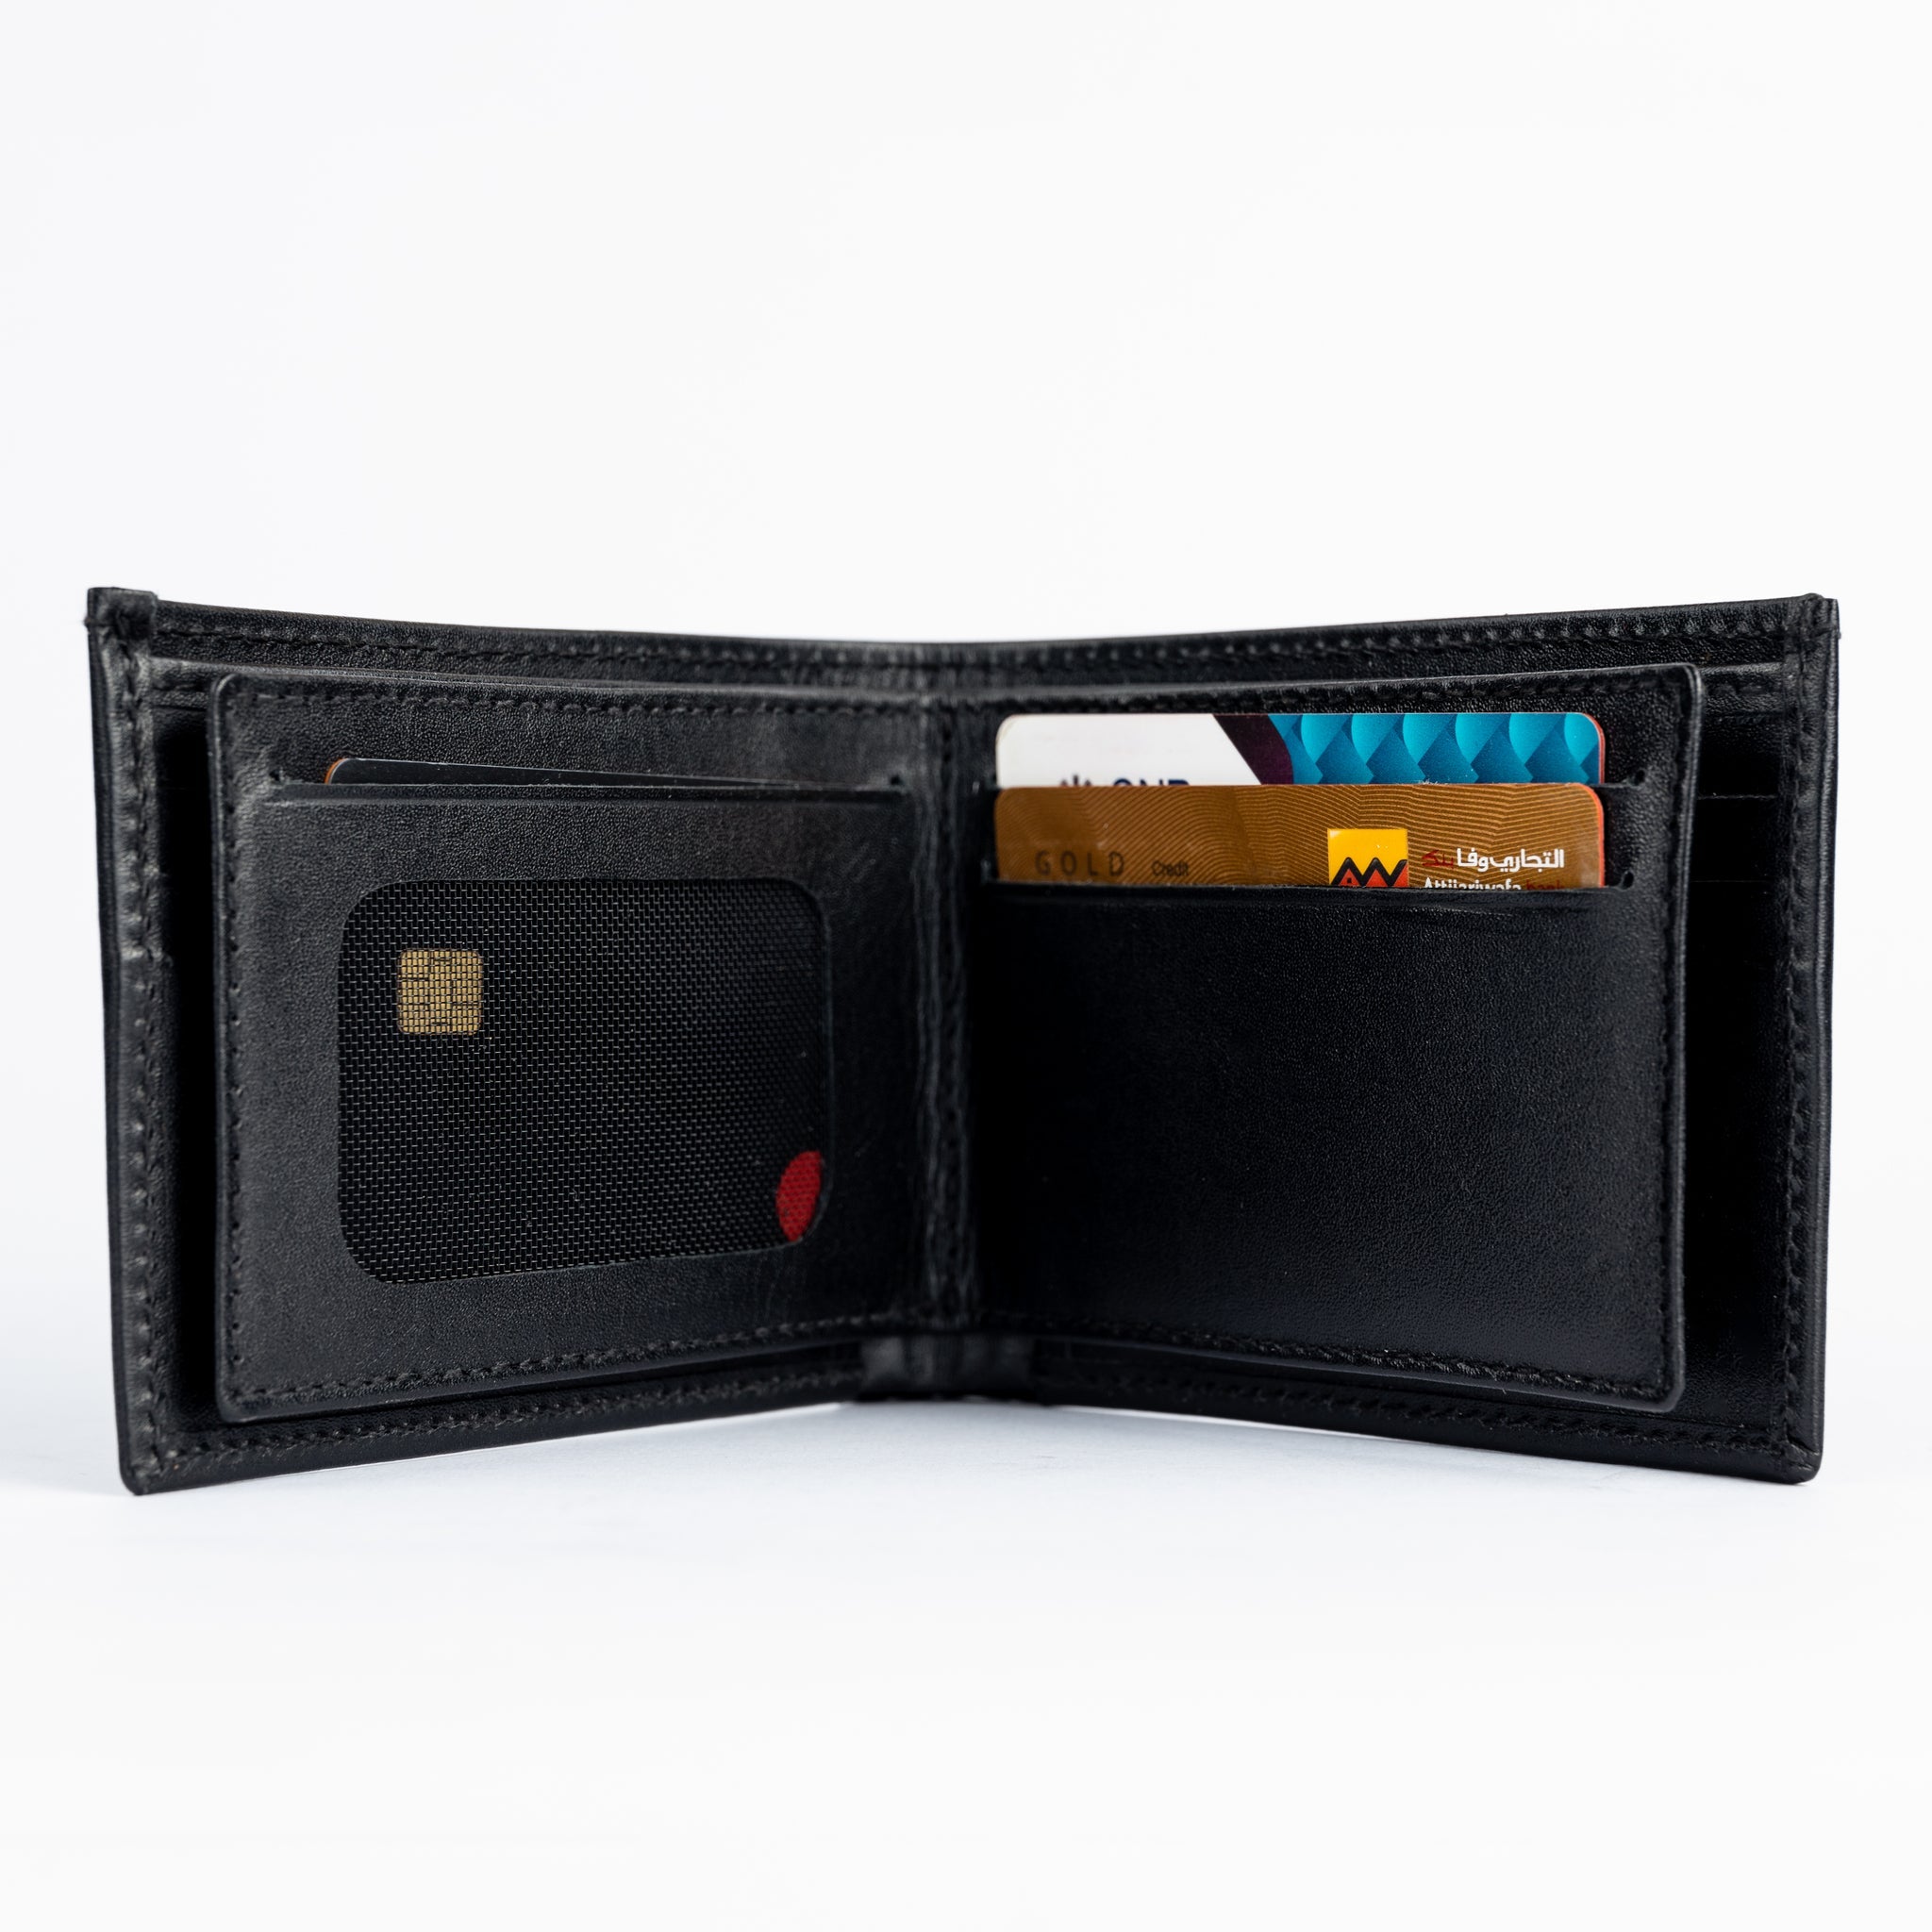 Leather Wallet - Black - Hatchill